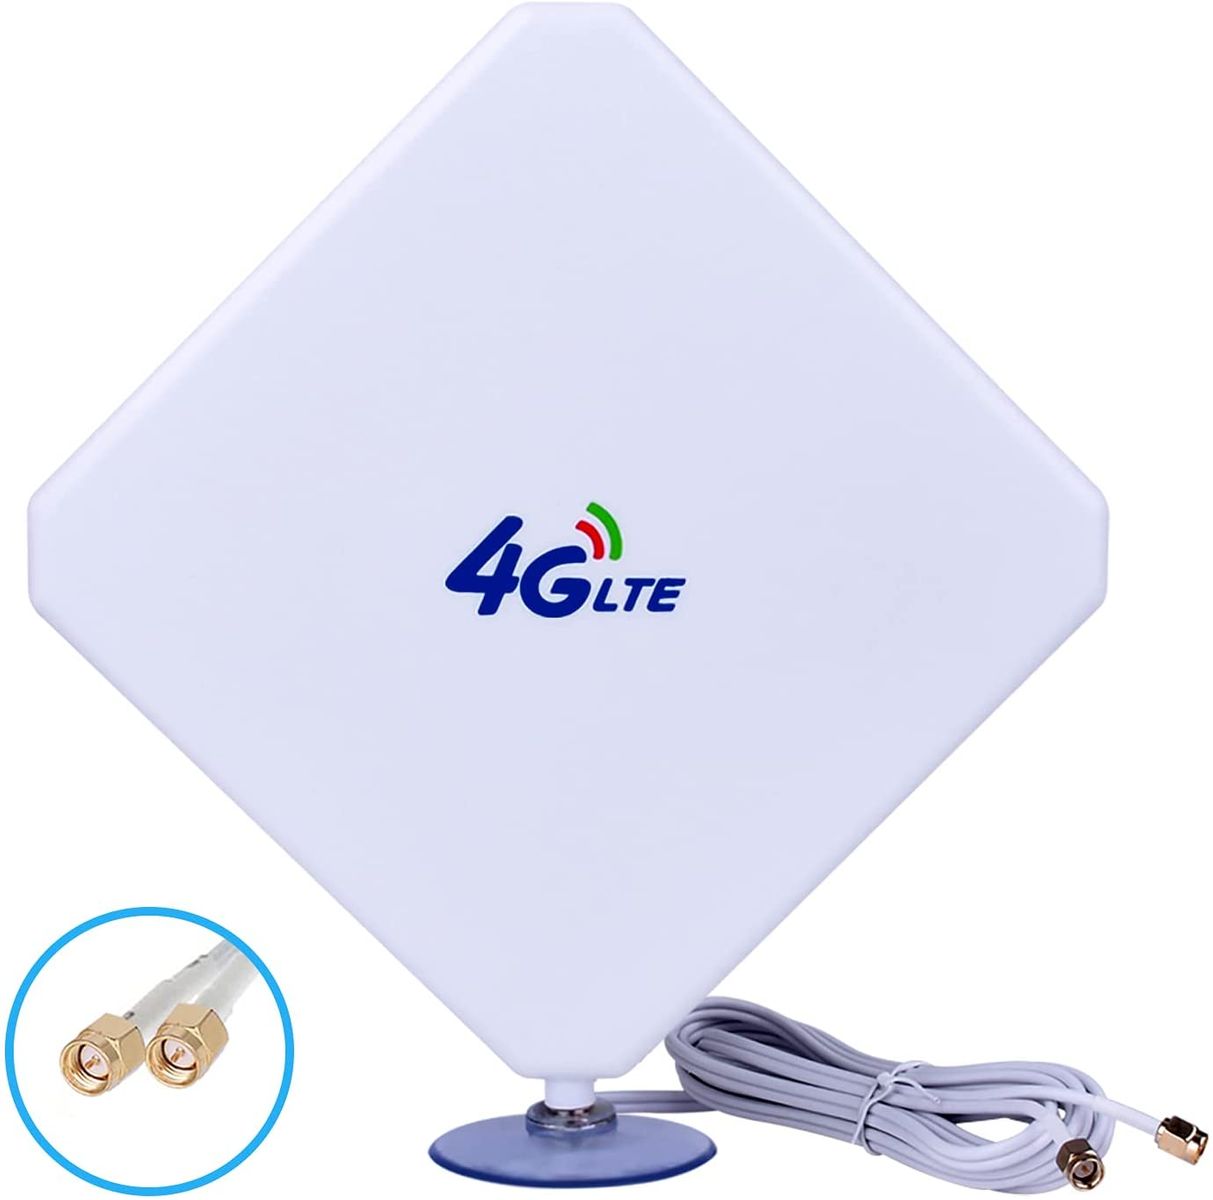 Aigital SMA 4G LTE Antenna Dual Mimo 35dBi High Performance Network Antenna Signal Amplification Modem Adapter for Mobile Hotspots with 2 m Cable and Suction Cup